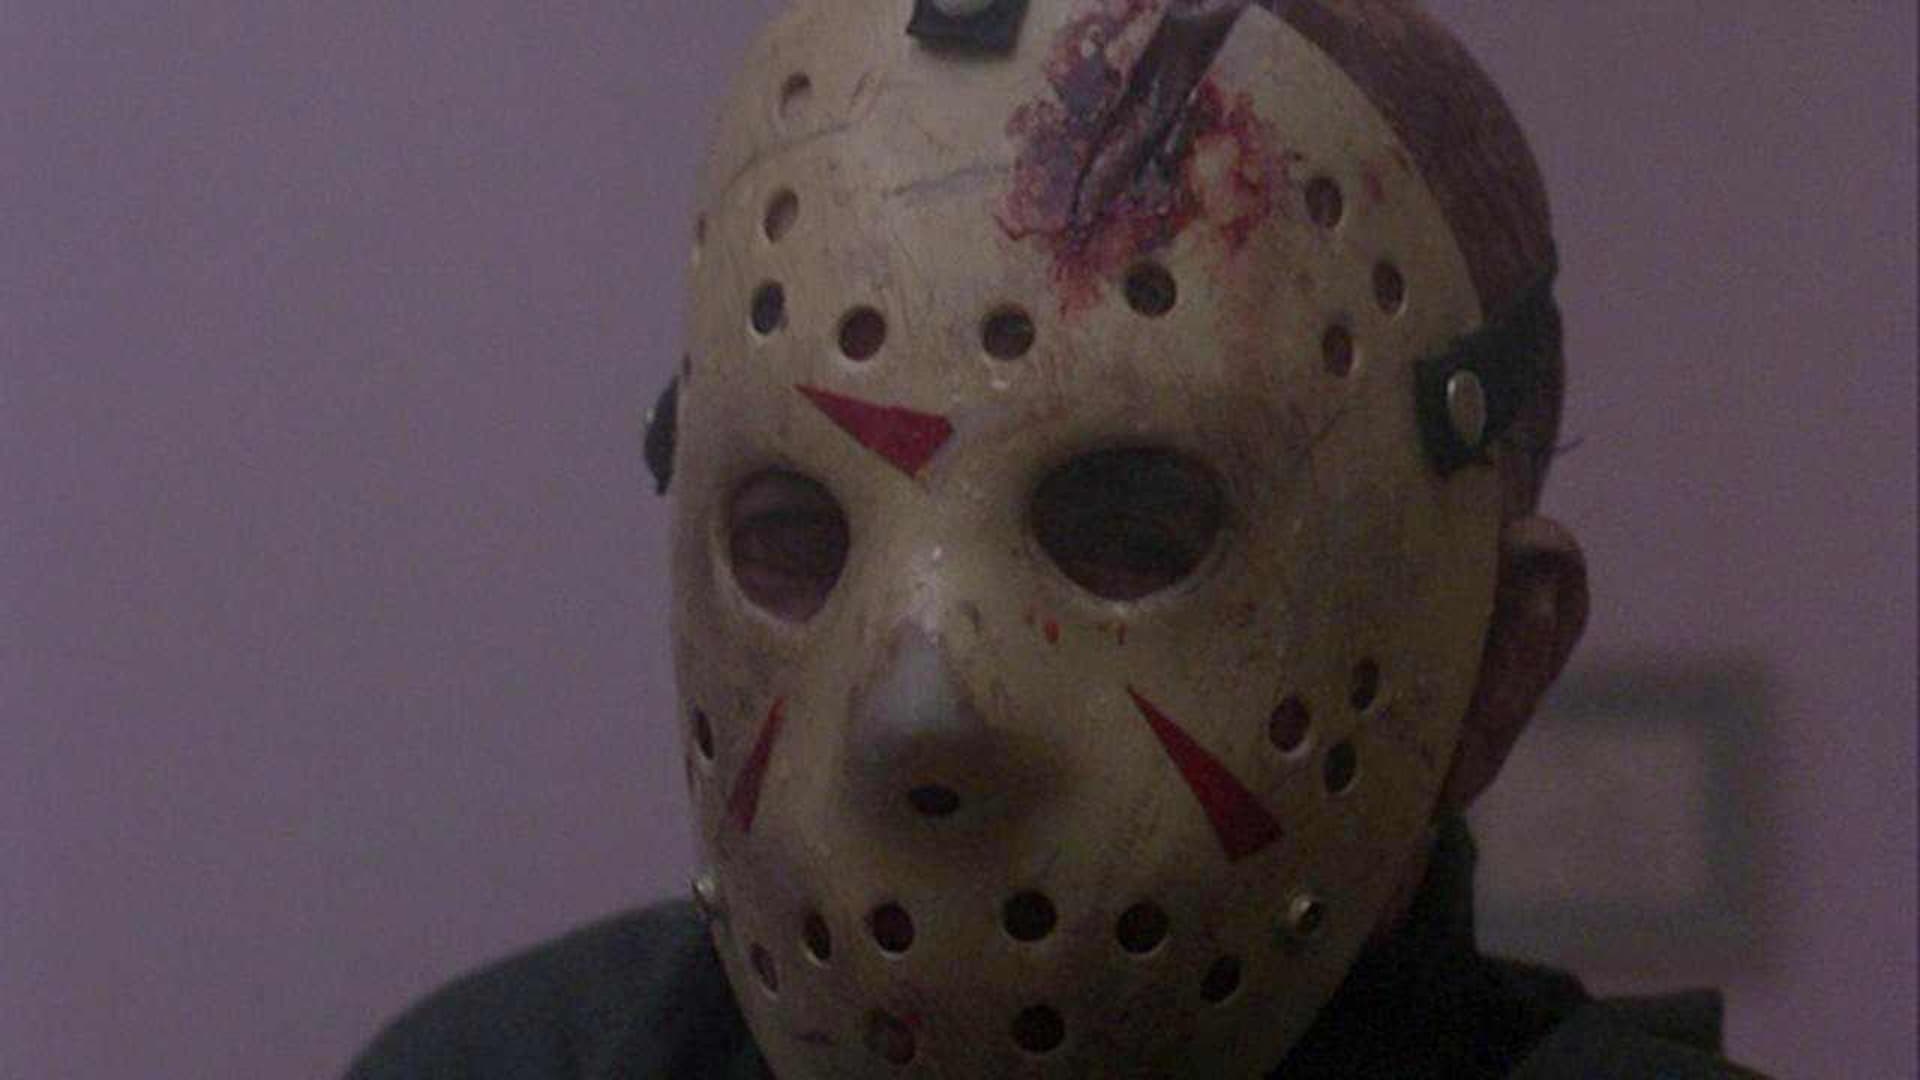 Friday the 13th---The Final Chapter (1984)